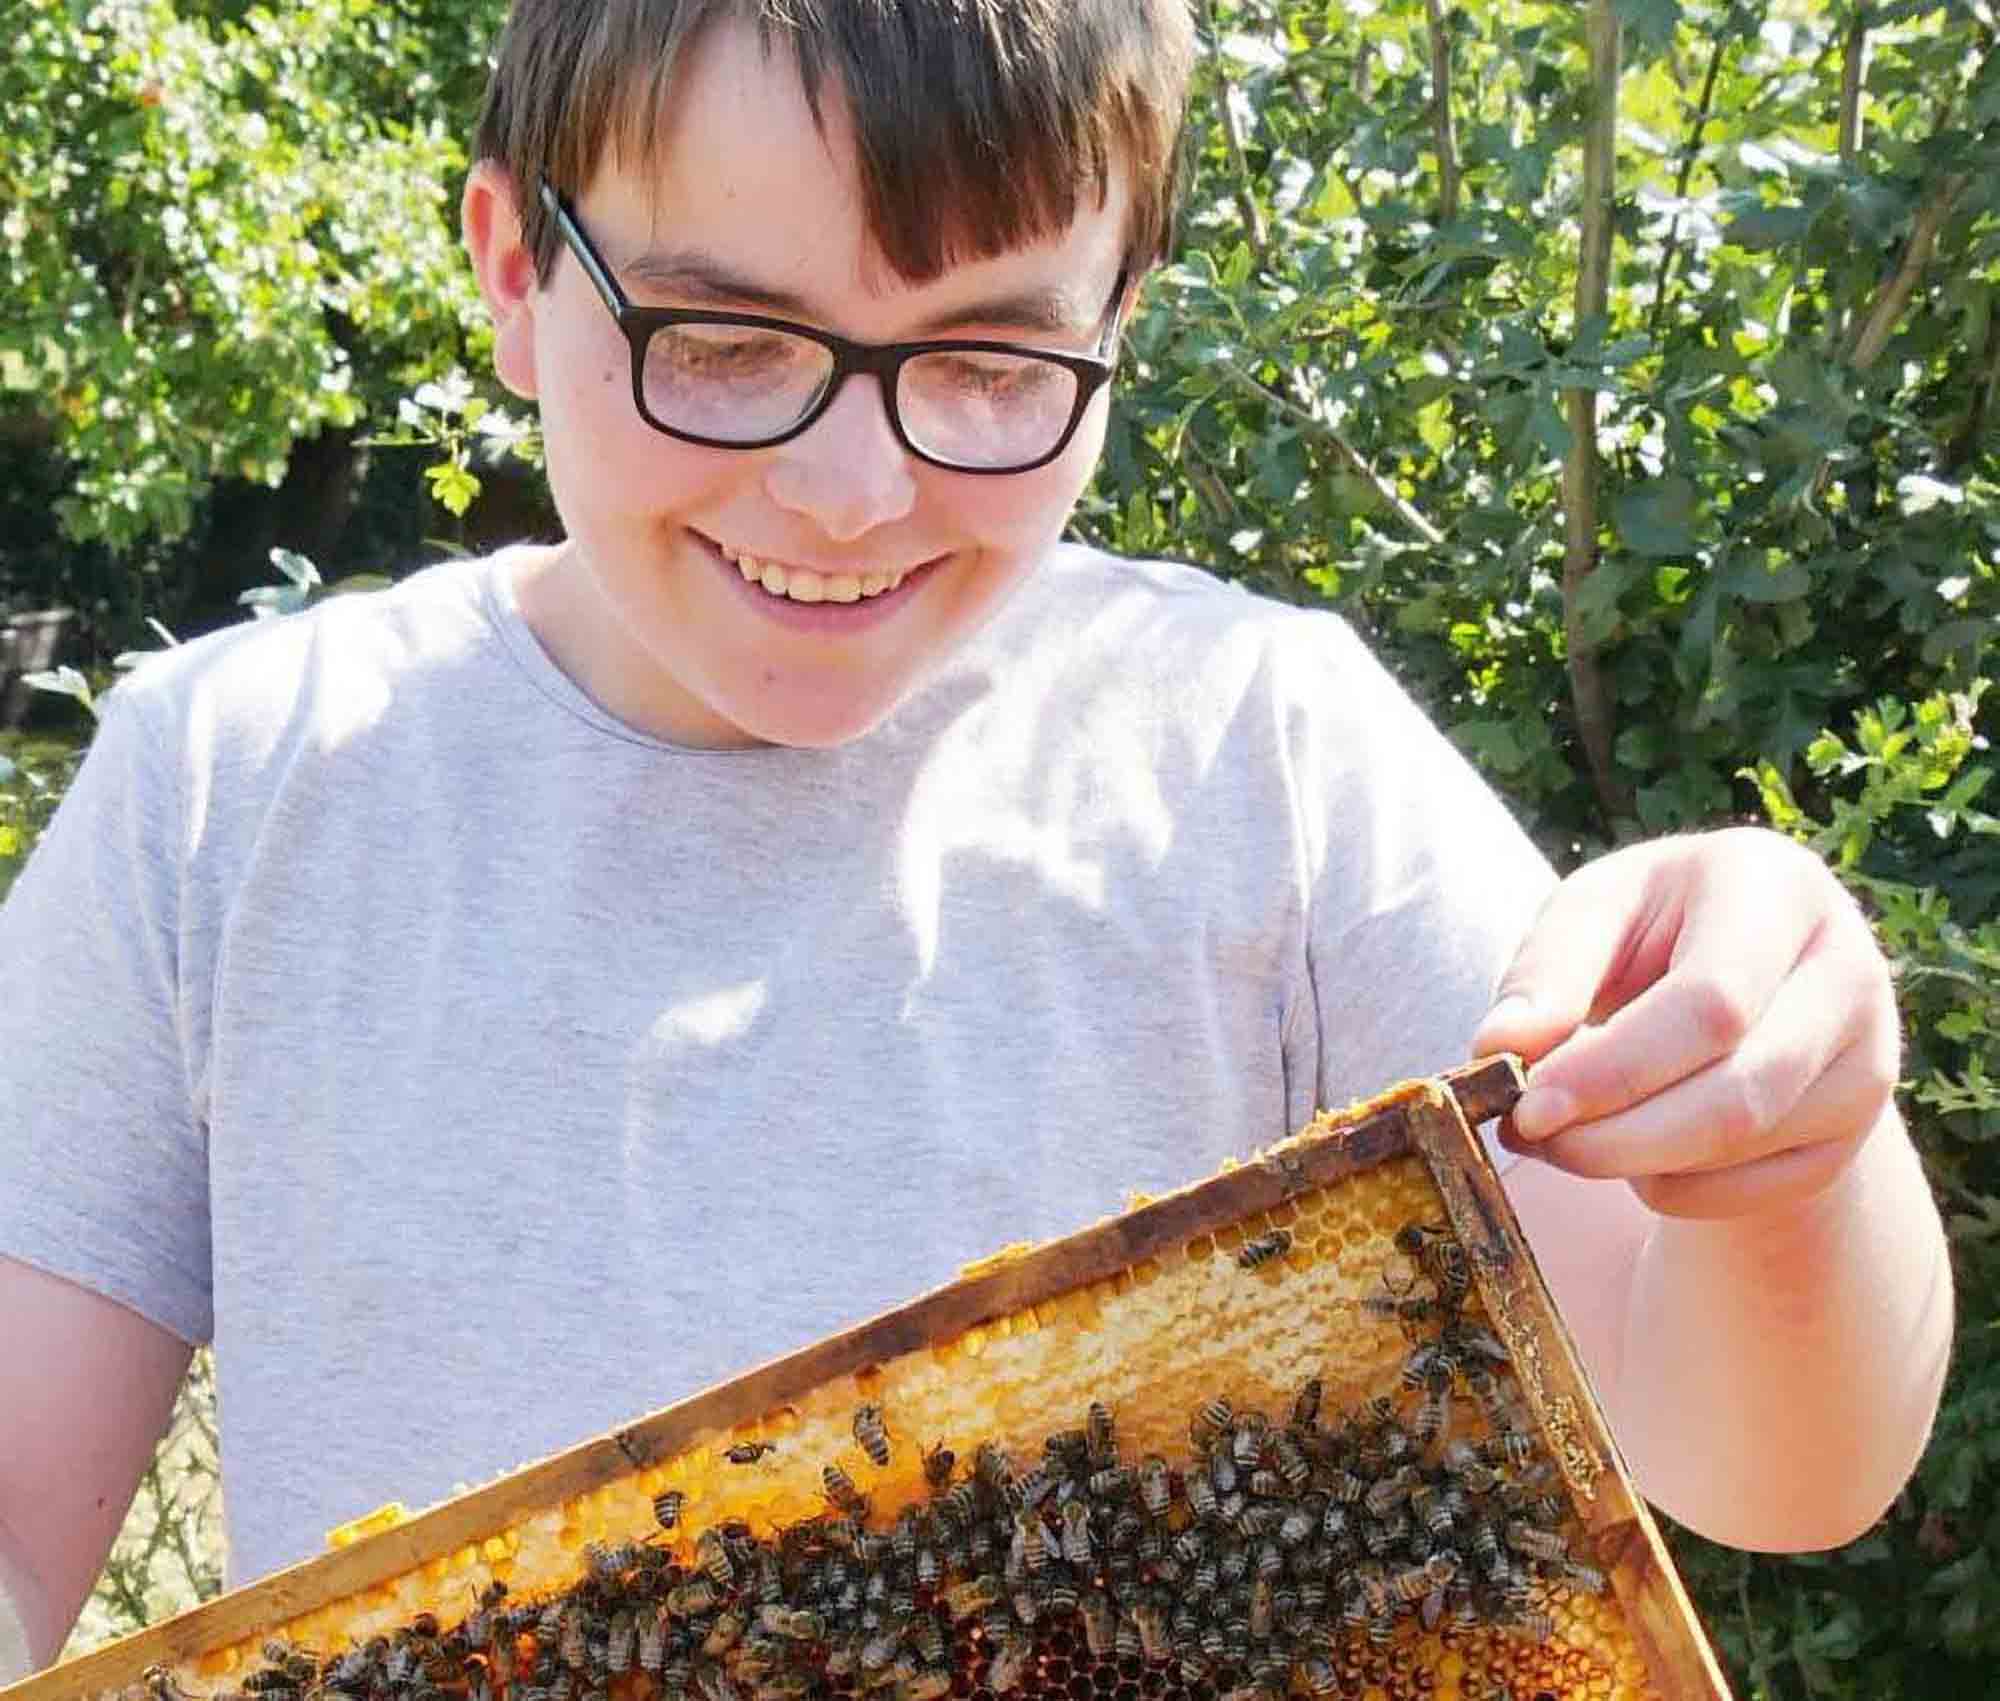 Beekeeping Is Time-Consuming But Great, Says Teenager…